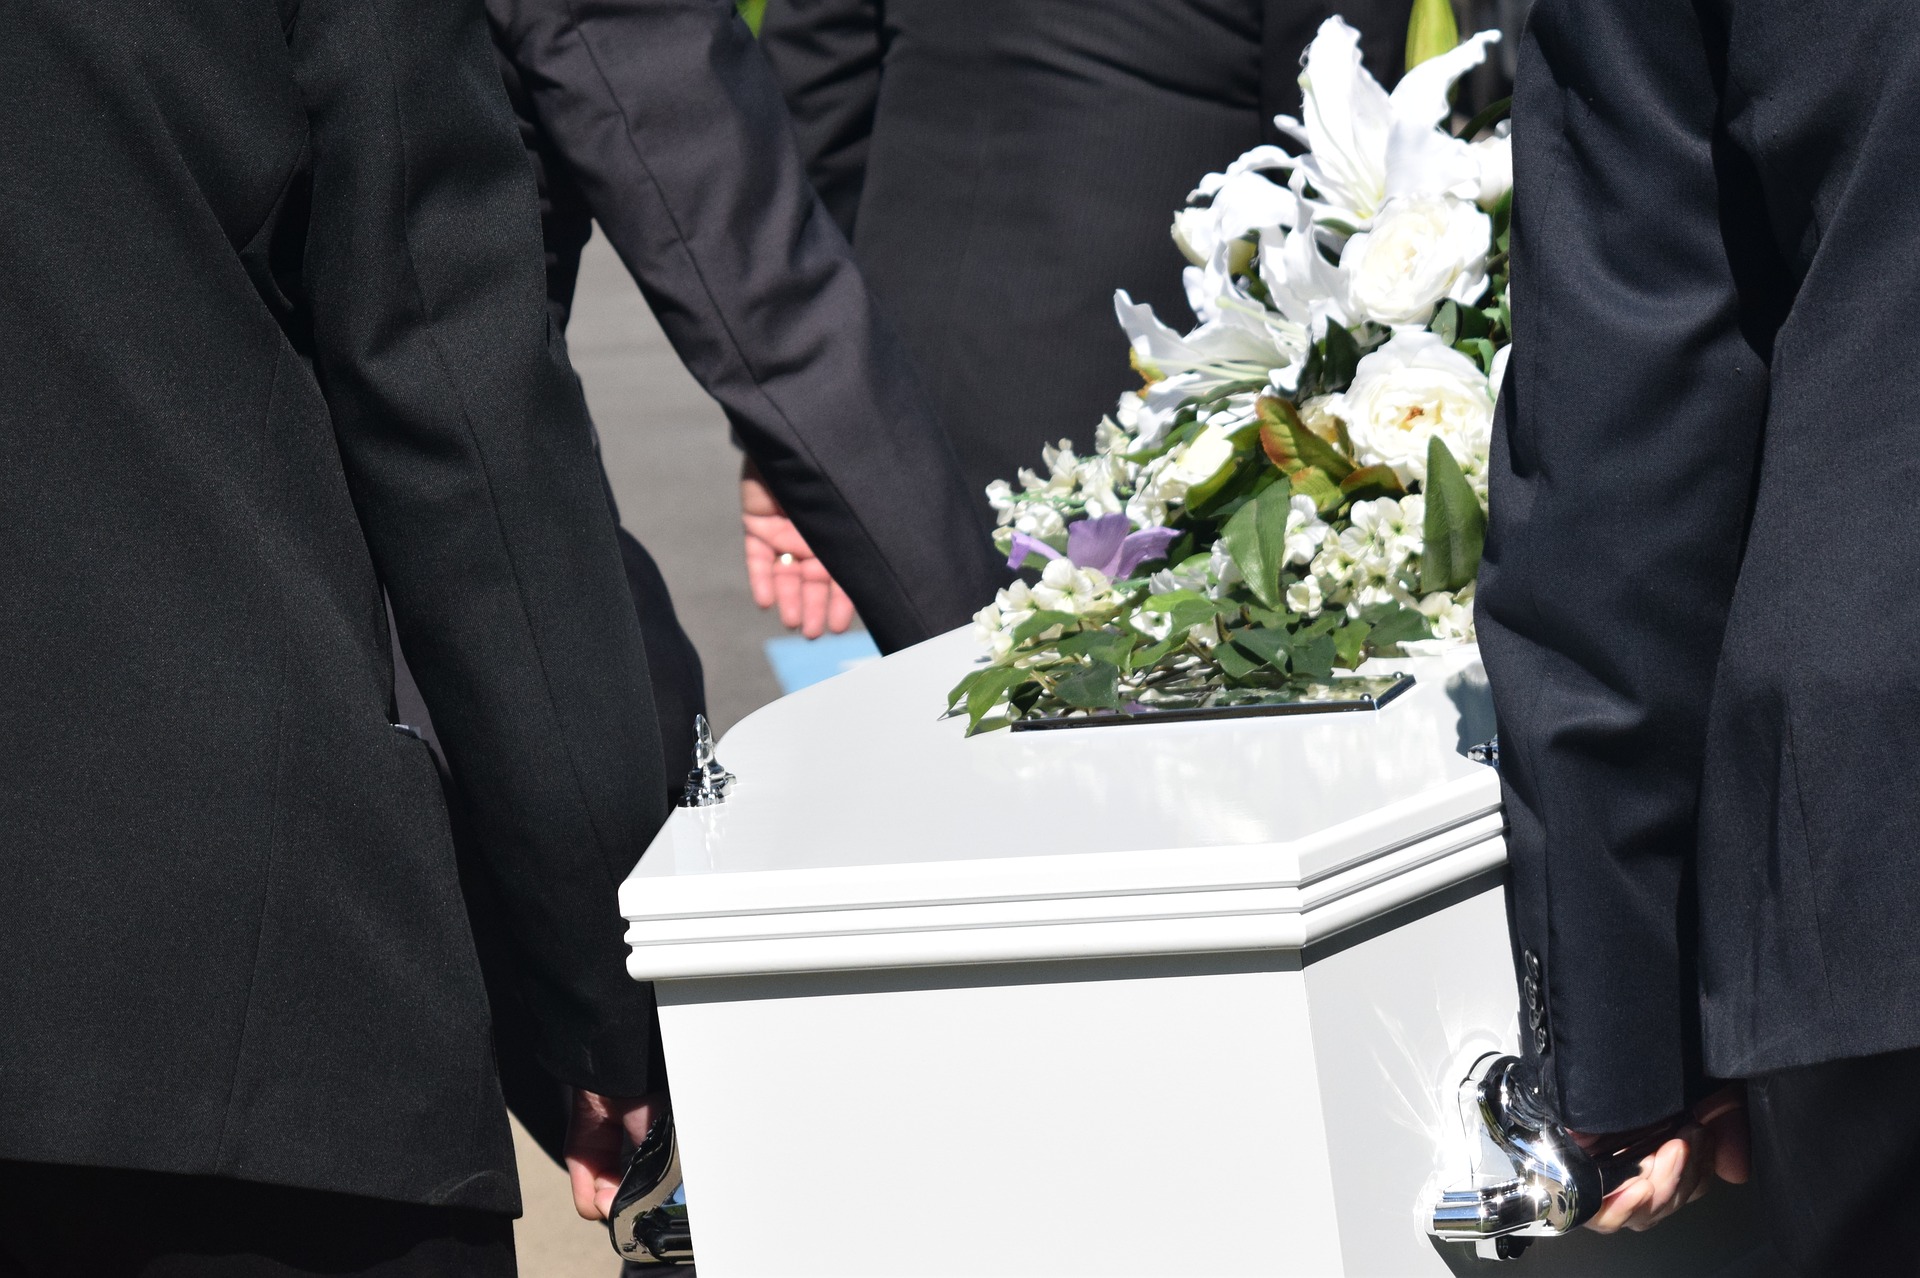 When Do You Need a Wrongful Death Lawyer in Lancaster?